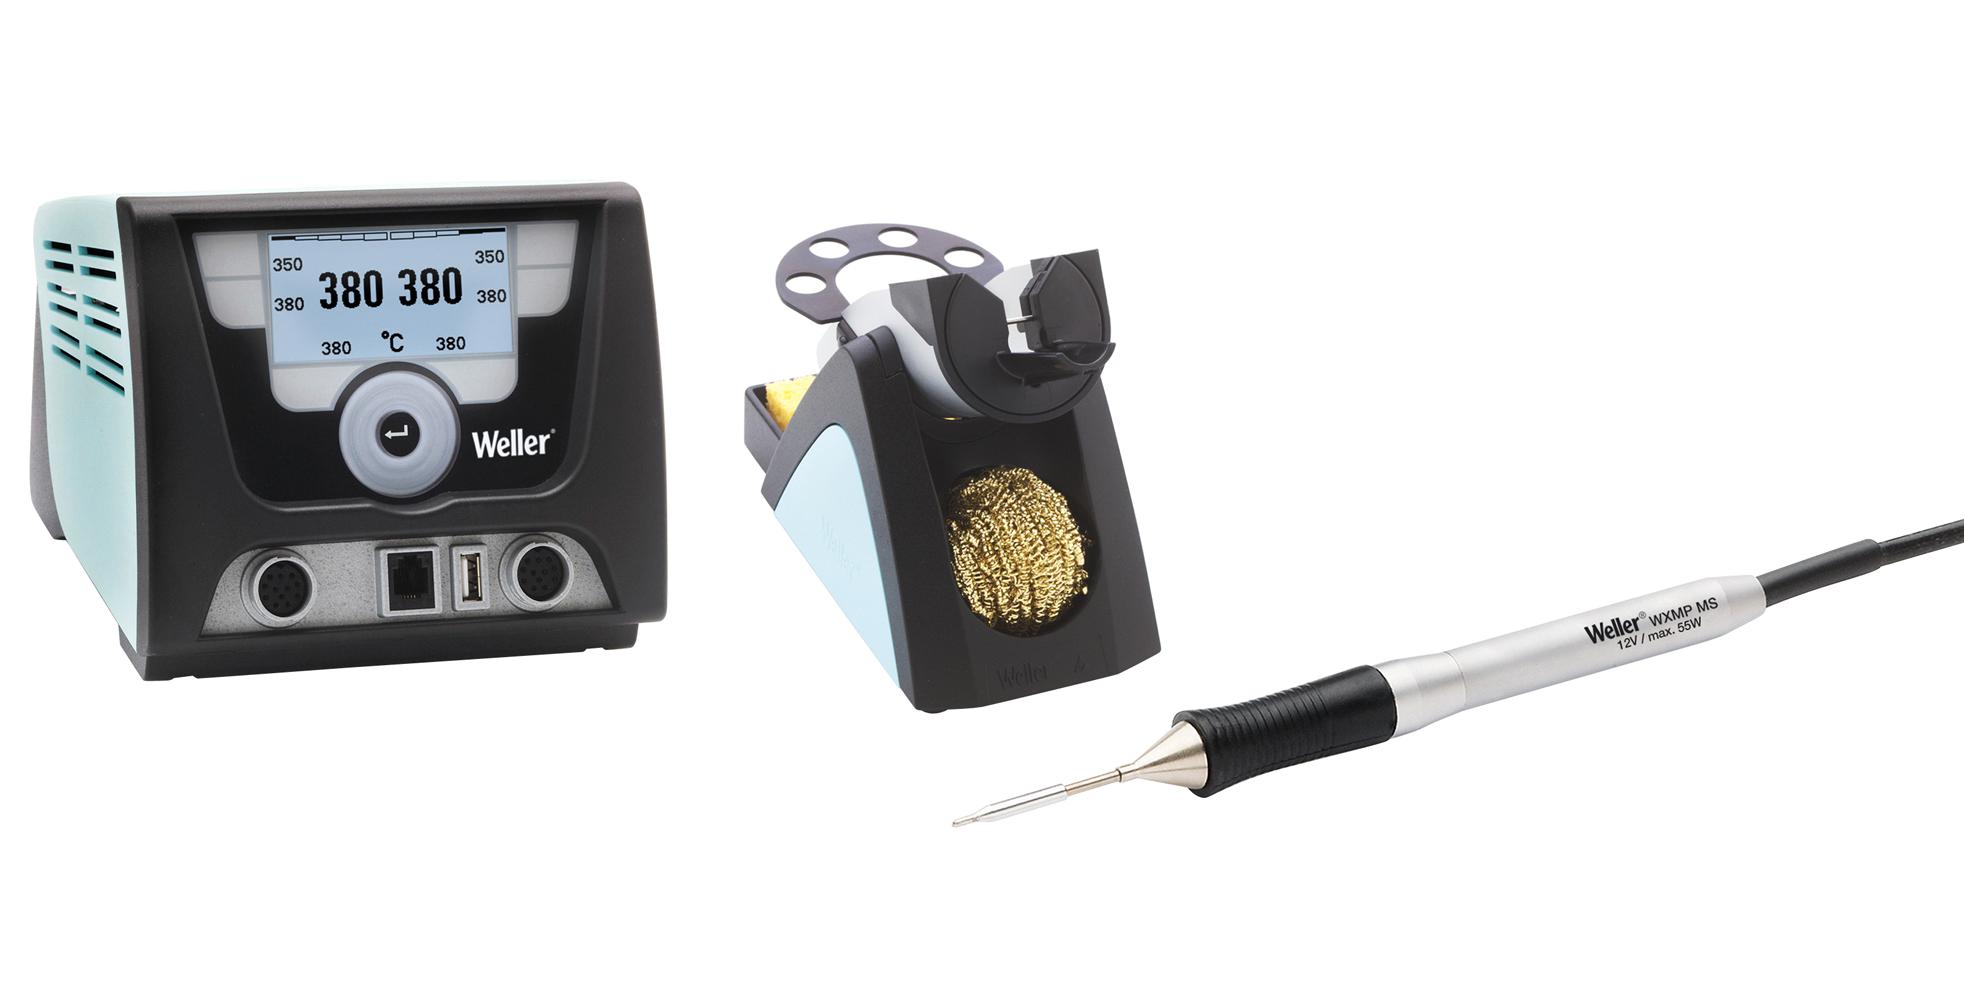 Weller Wx 2010 Micro Promo Micro Soldering Station Set, 230V, 255W